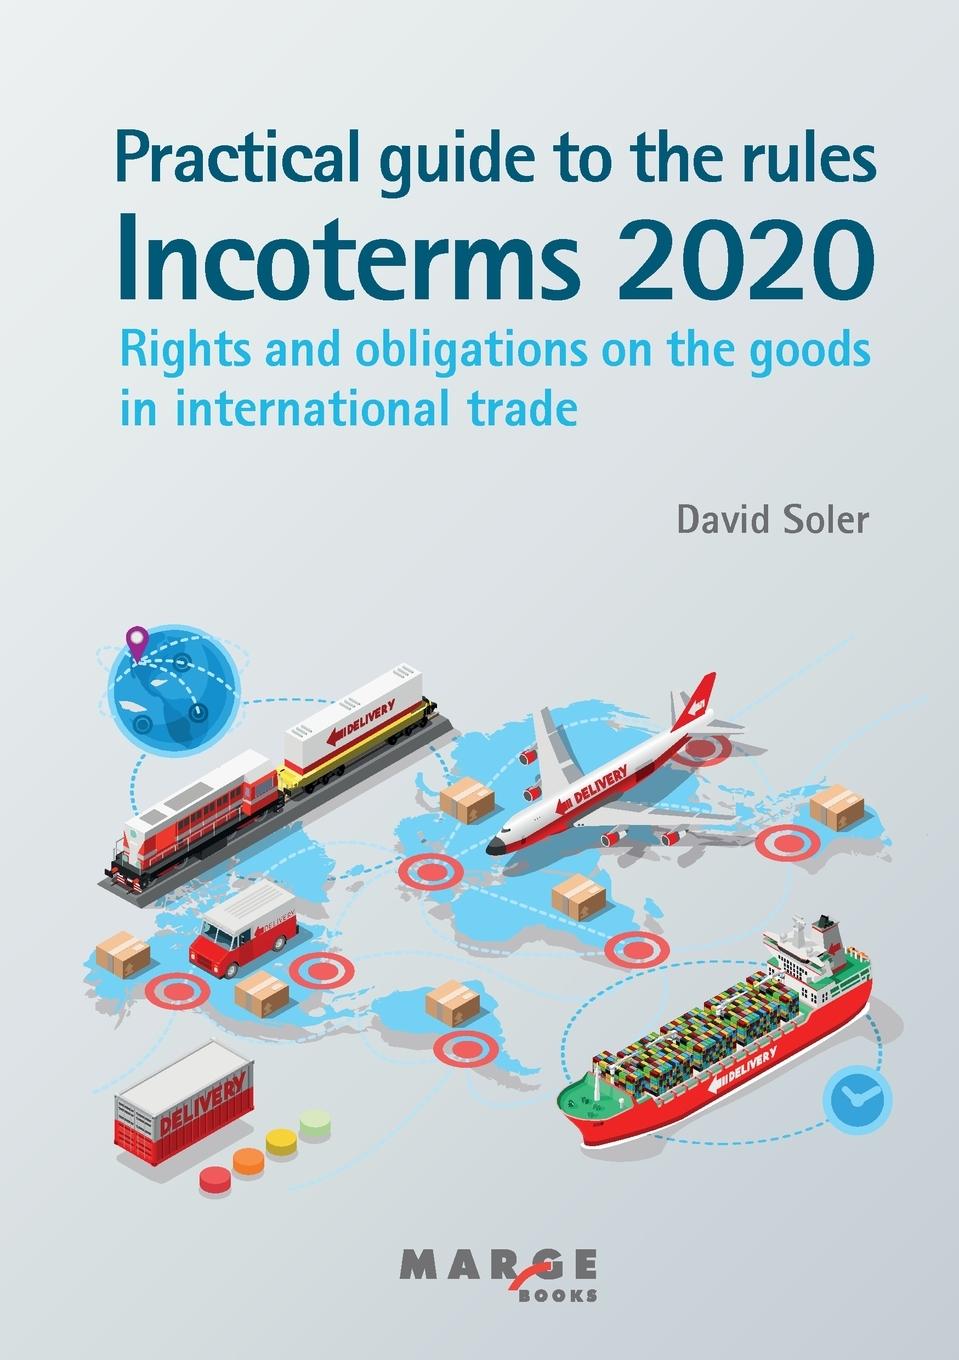 Książka Practical guide to the Incoterms 2020 rules David Soler